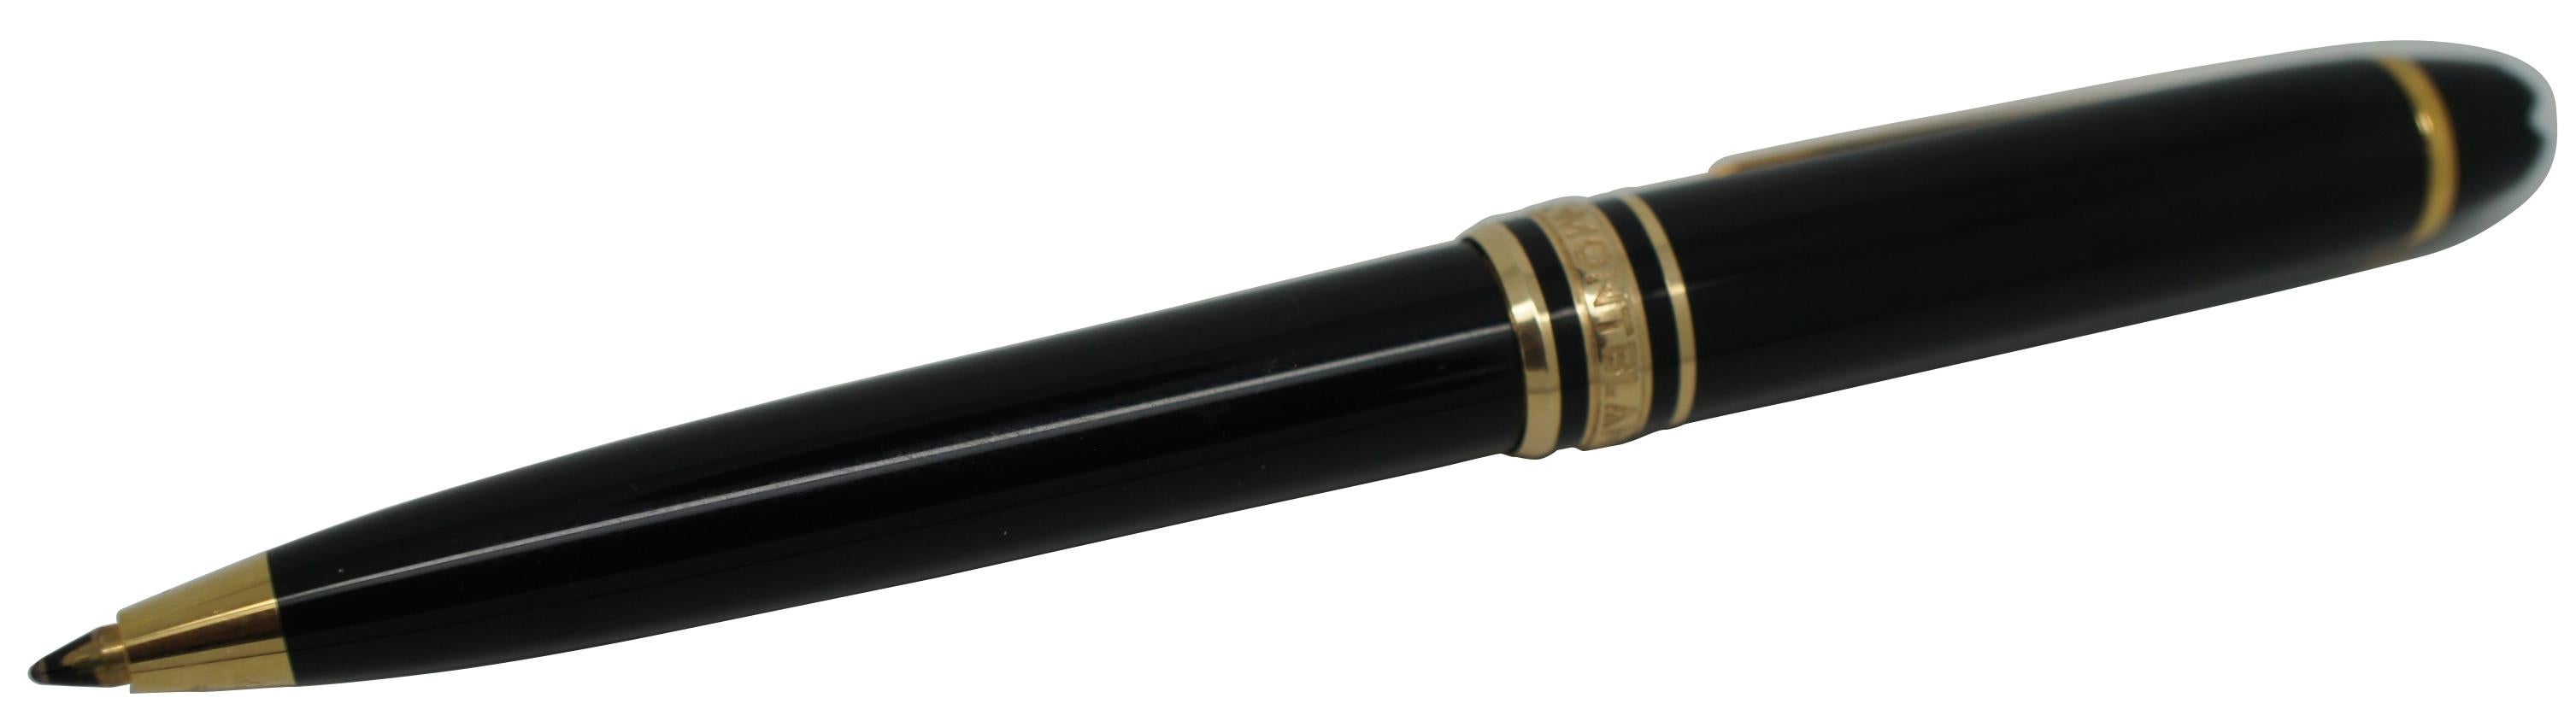 Vintage Montblanc Meisterstuck black and gold small size ballpoint pen. Serial number IK1107656.
 